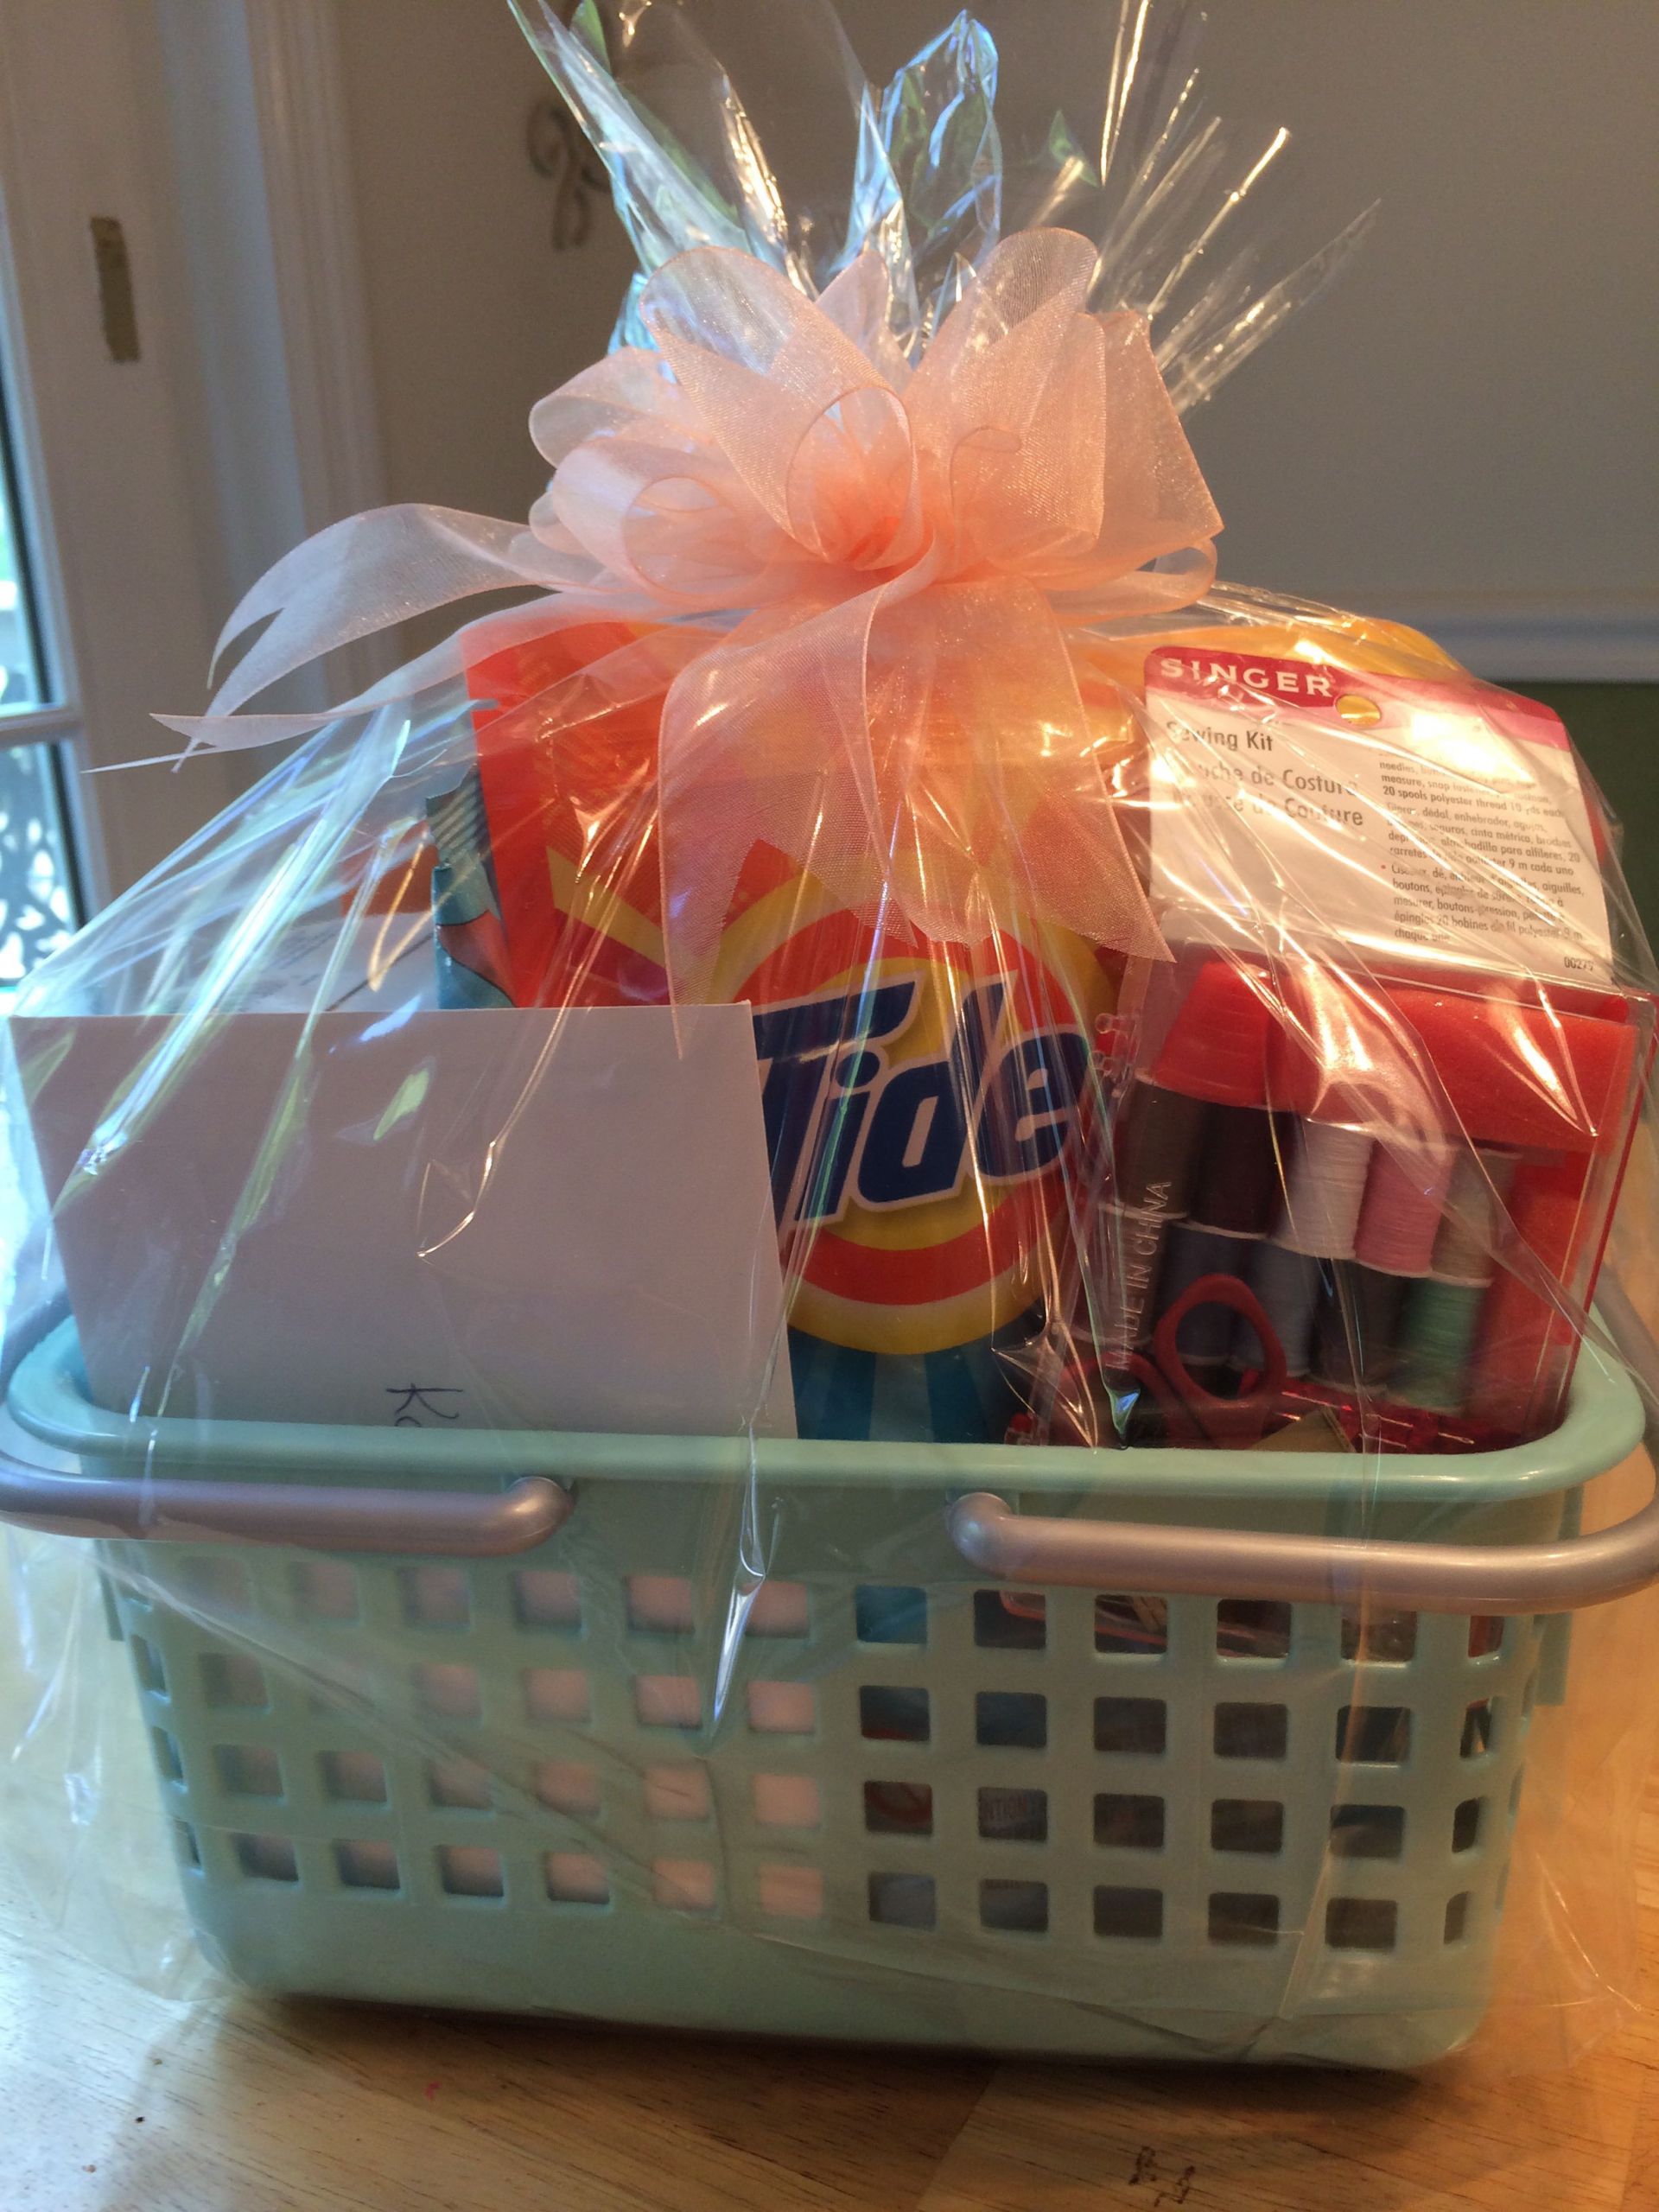 Going To College Gift Basket Ideas
 Going off to college t Just a few items and a cute